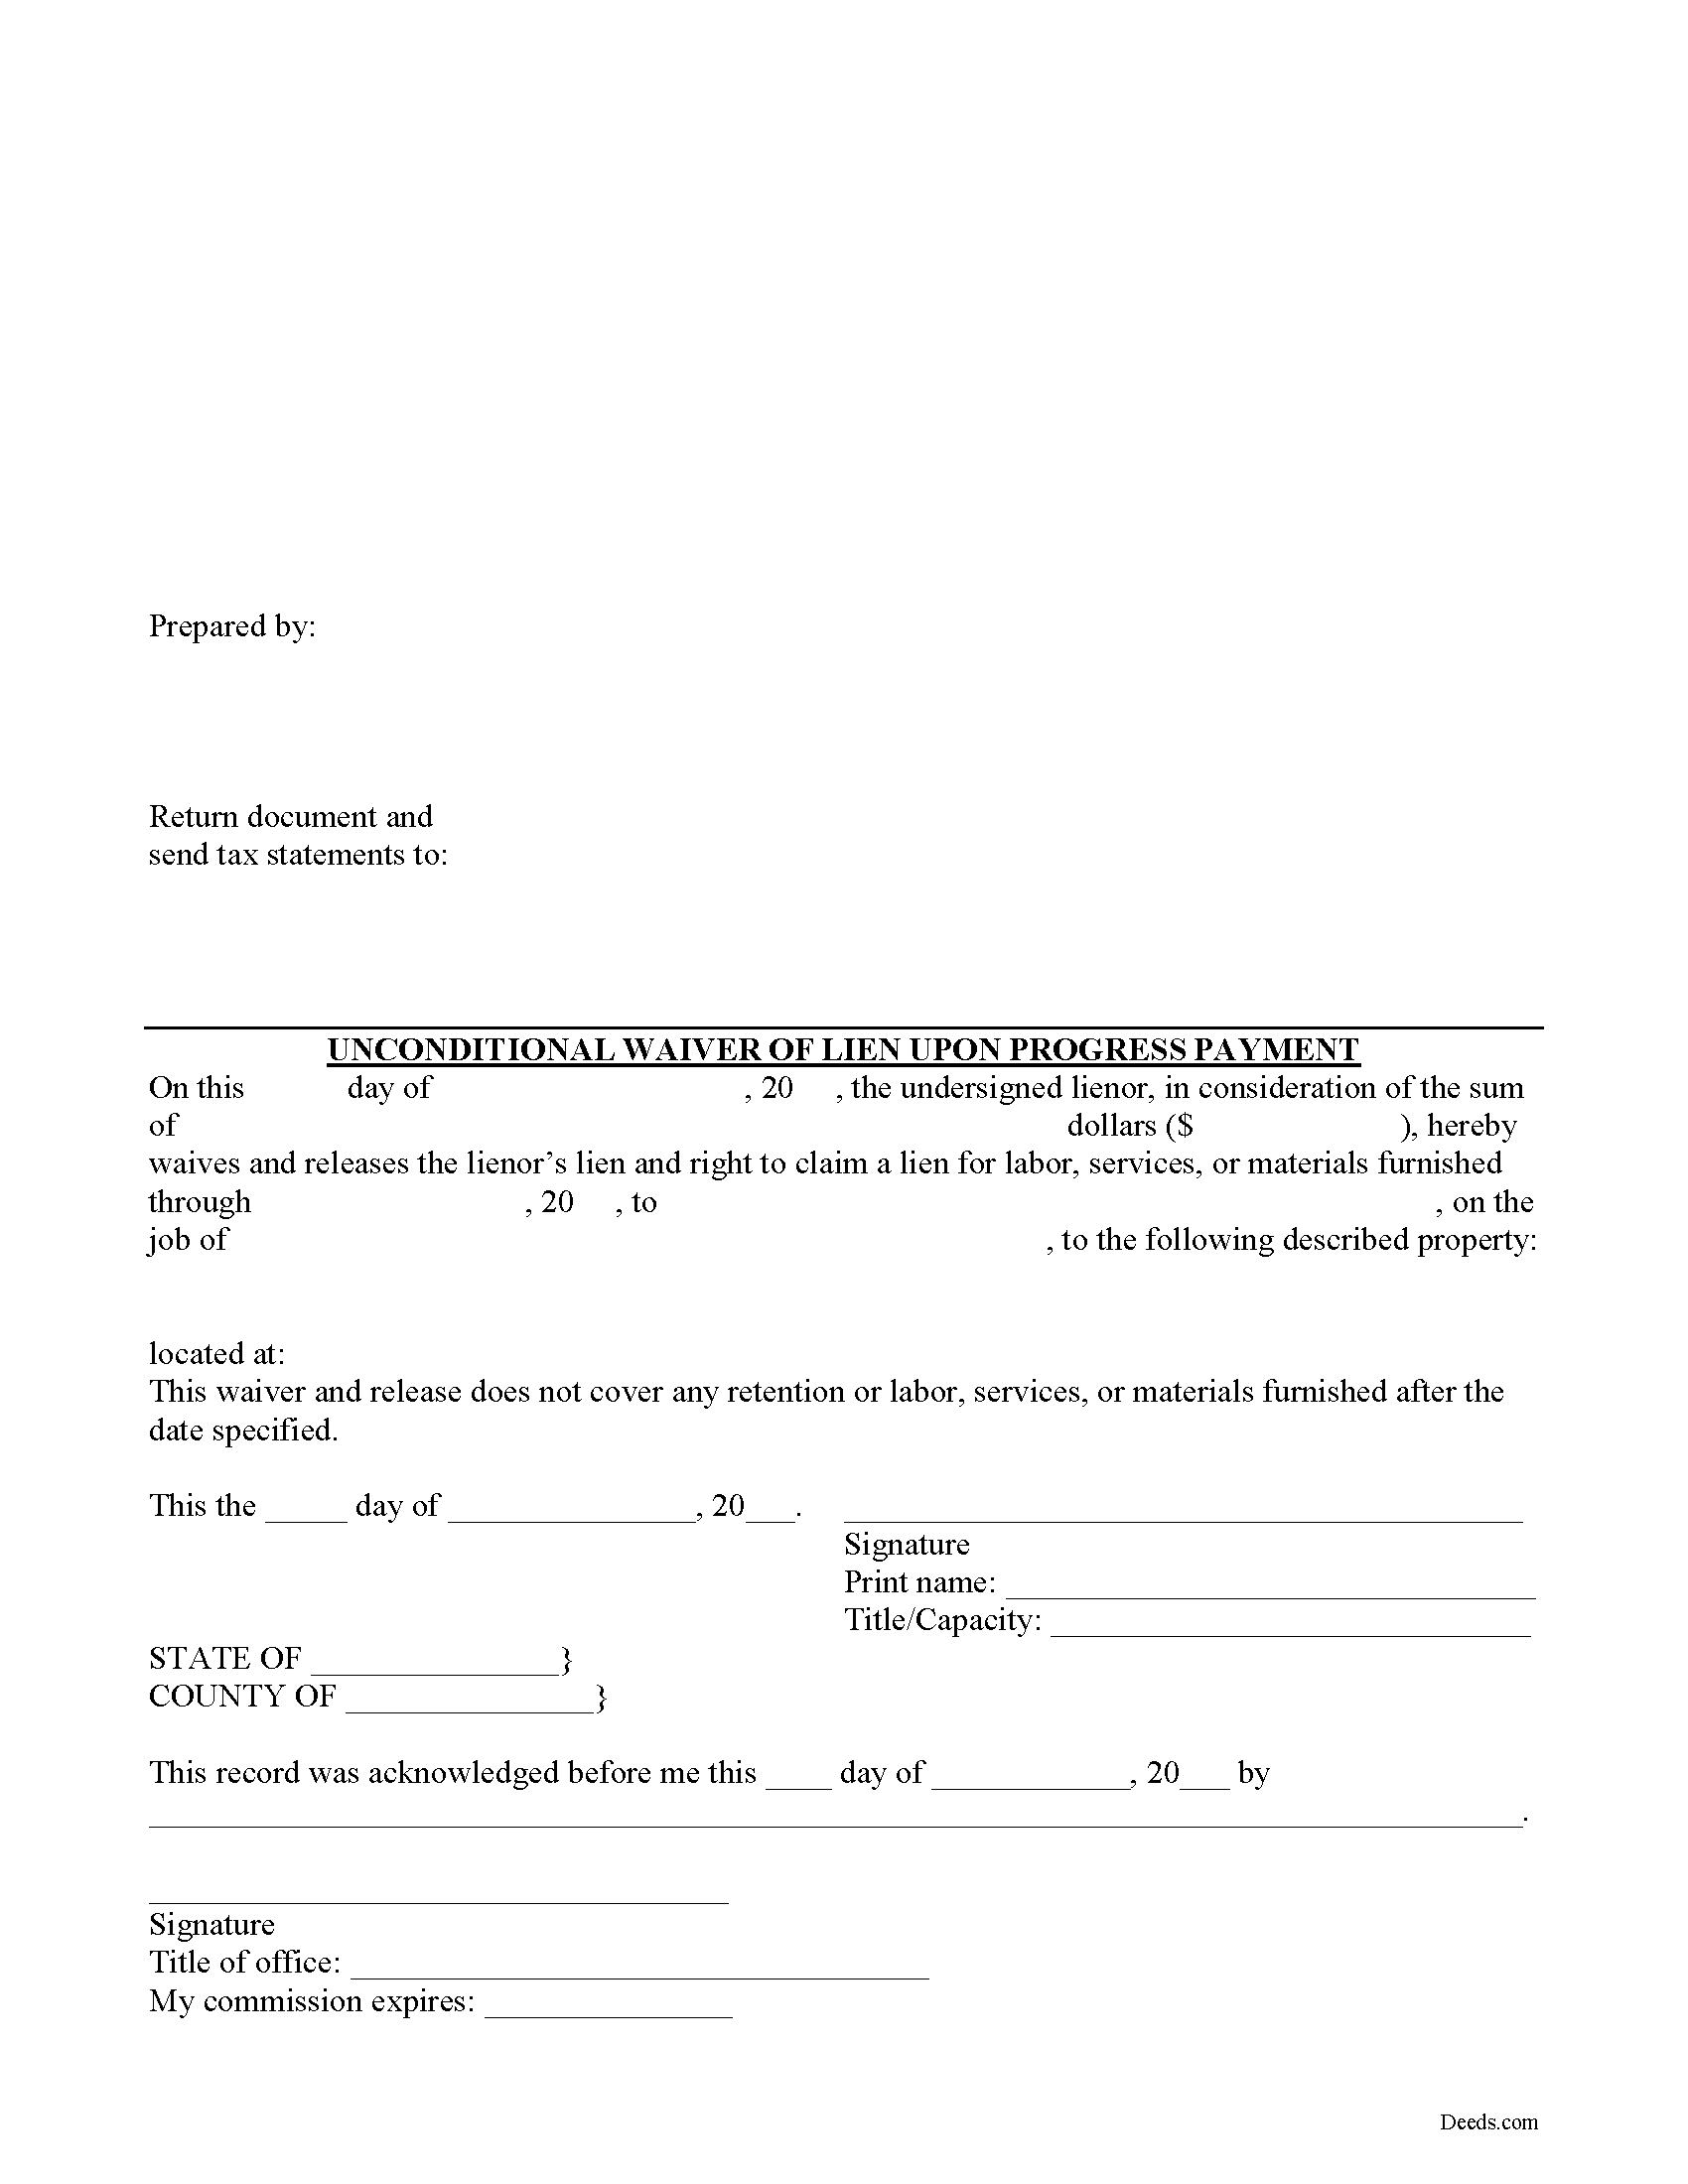 Unconditional Waiver upon Progress Payment Form